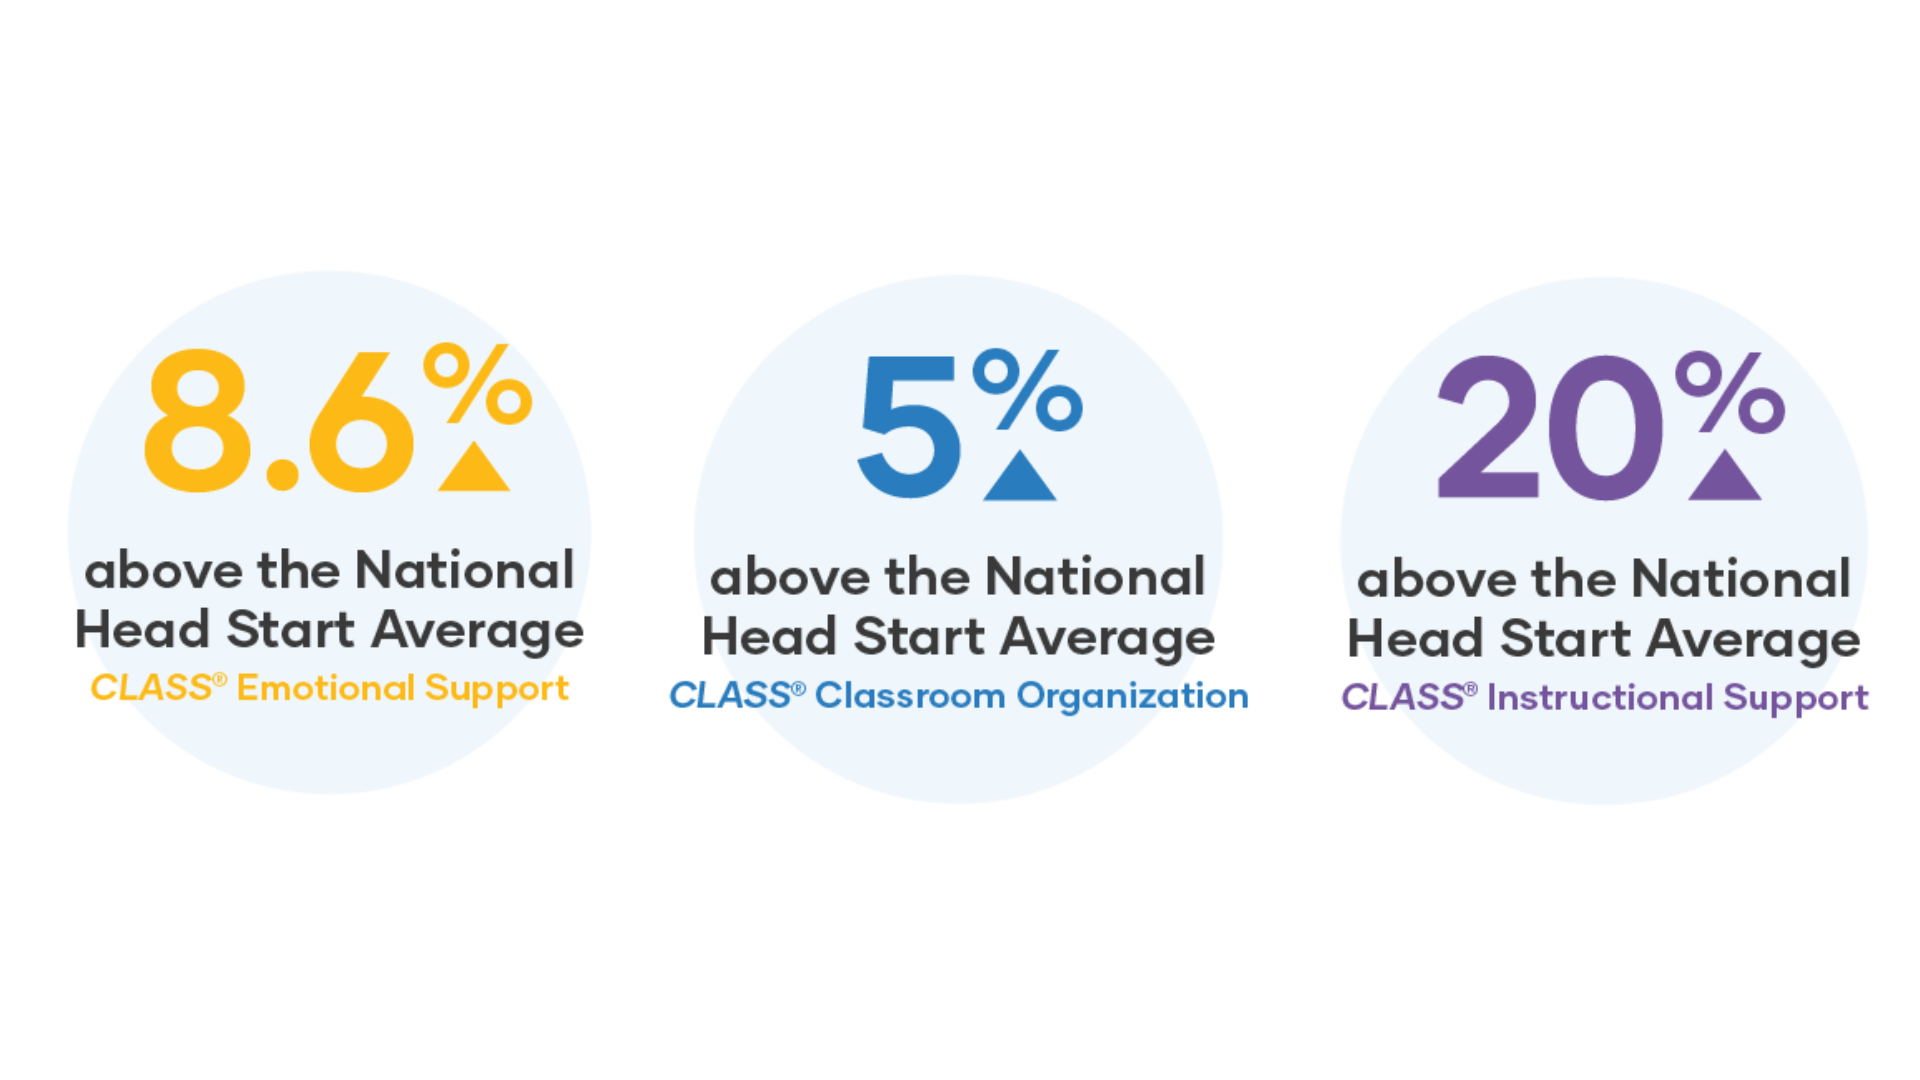 • 8.6% above the national average for Emotional Support with a score of 6.57,  • 5% above the national average for Classroom Organization with a score of 6.08, and  • a whopping 20% above the national average for Instructional Support with a score of 3.5. 